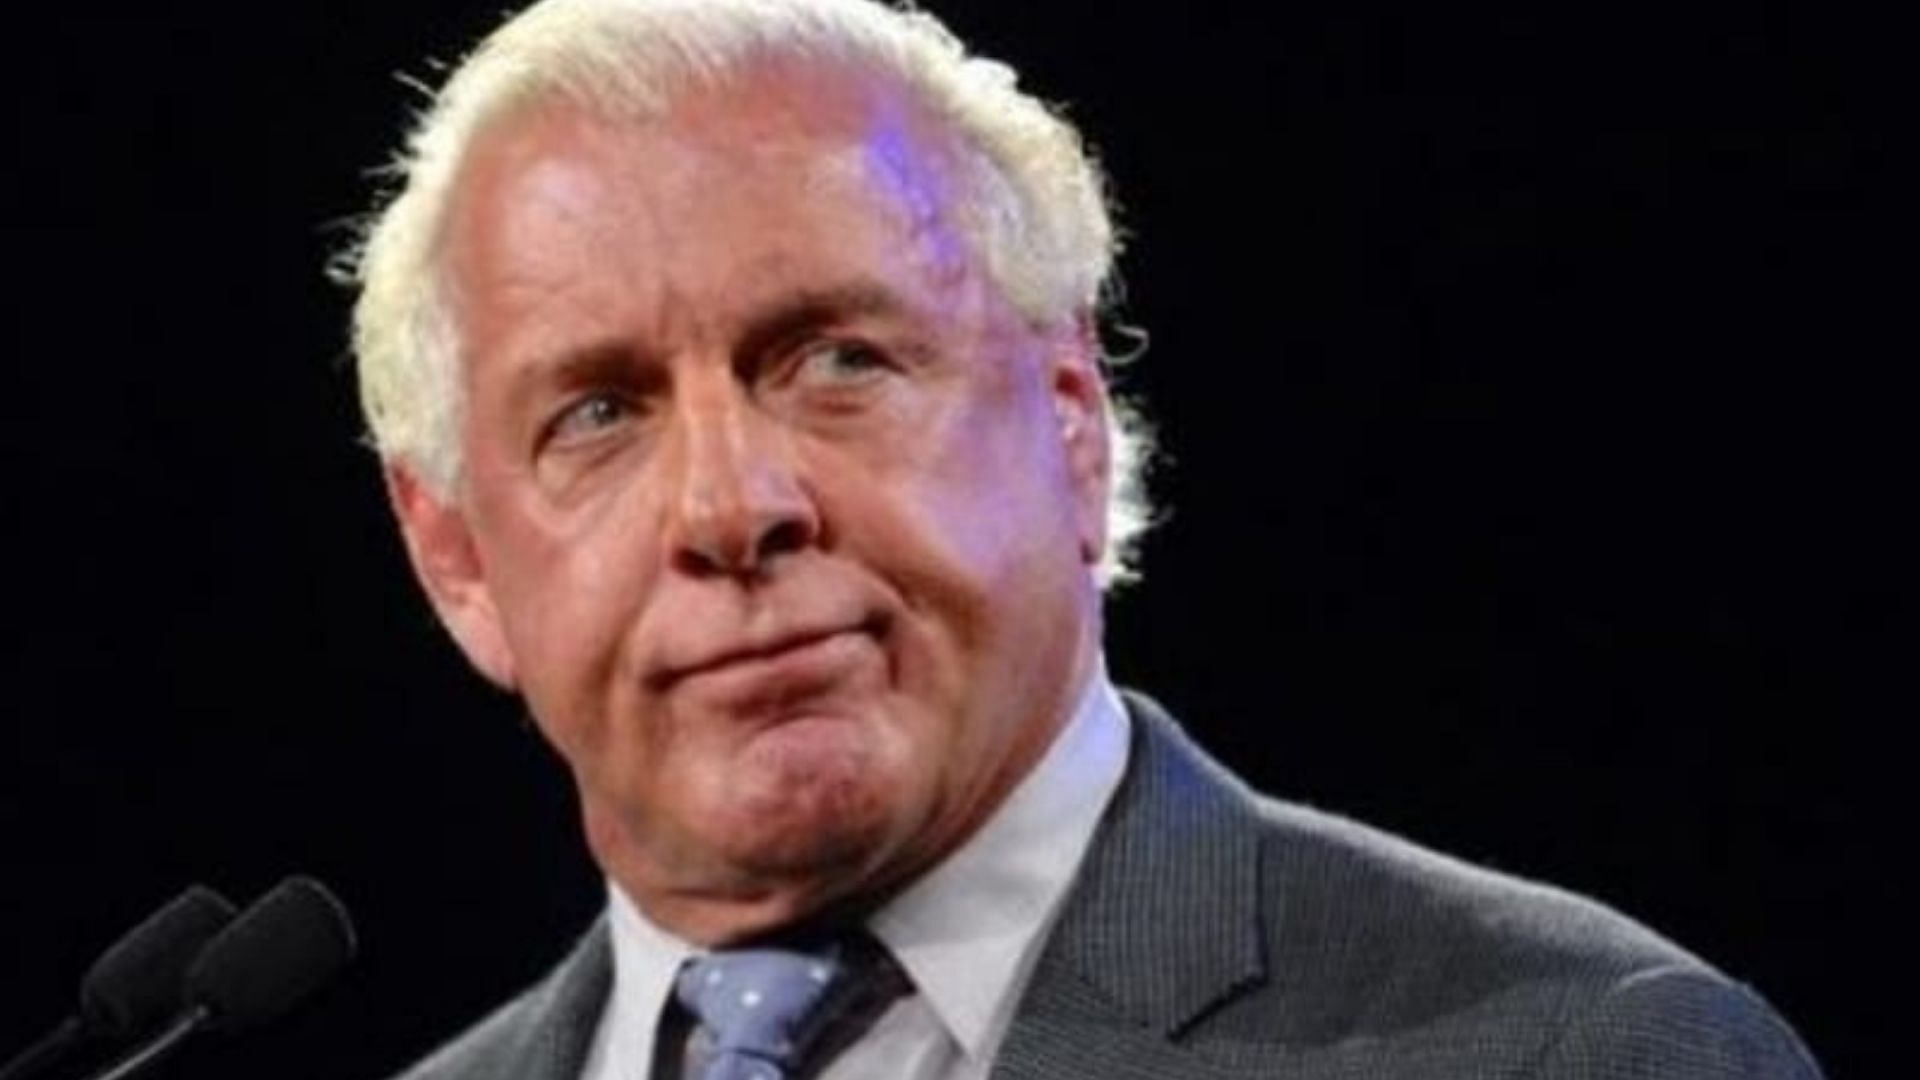 Ric Flair speaking at a press conference